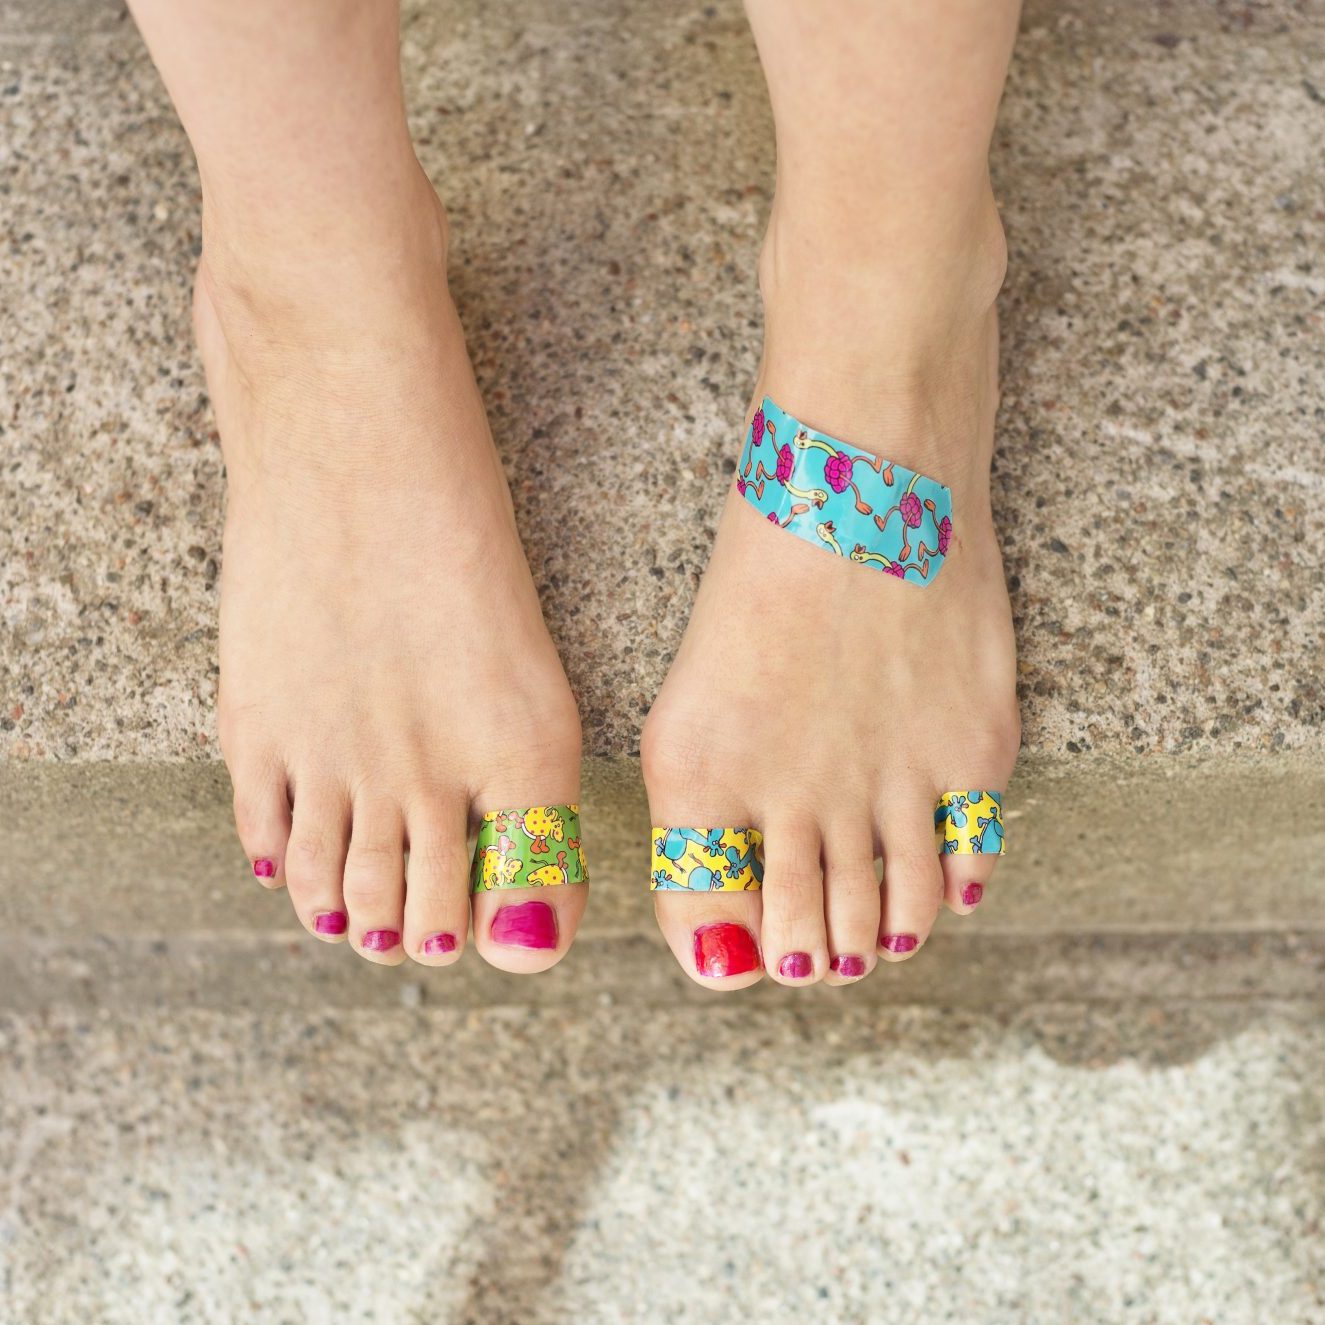 woman-with-blisters-and-bandaids-on-feet-from-running-in-bad-shoes